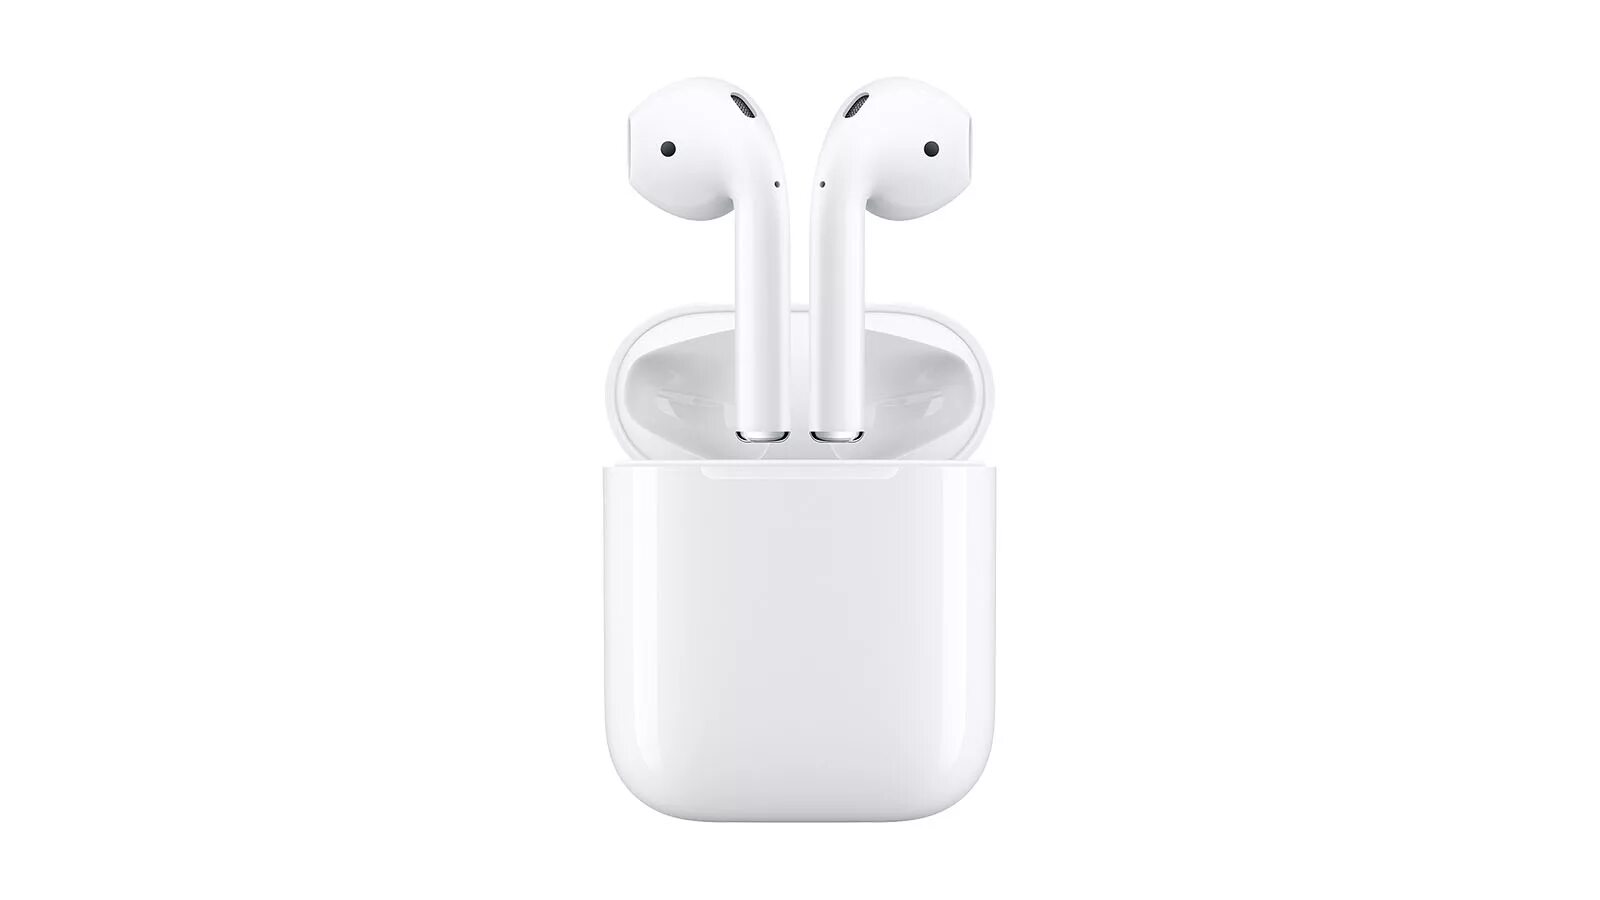 Airpods mv7n2 цены. AIRPODS Pro Box. AIRPODS Pro ong. AIRPODS 2 PNG. Аналог аирподс.